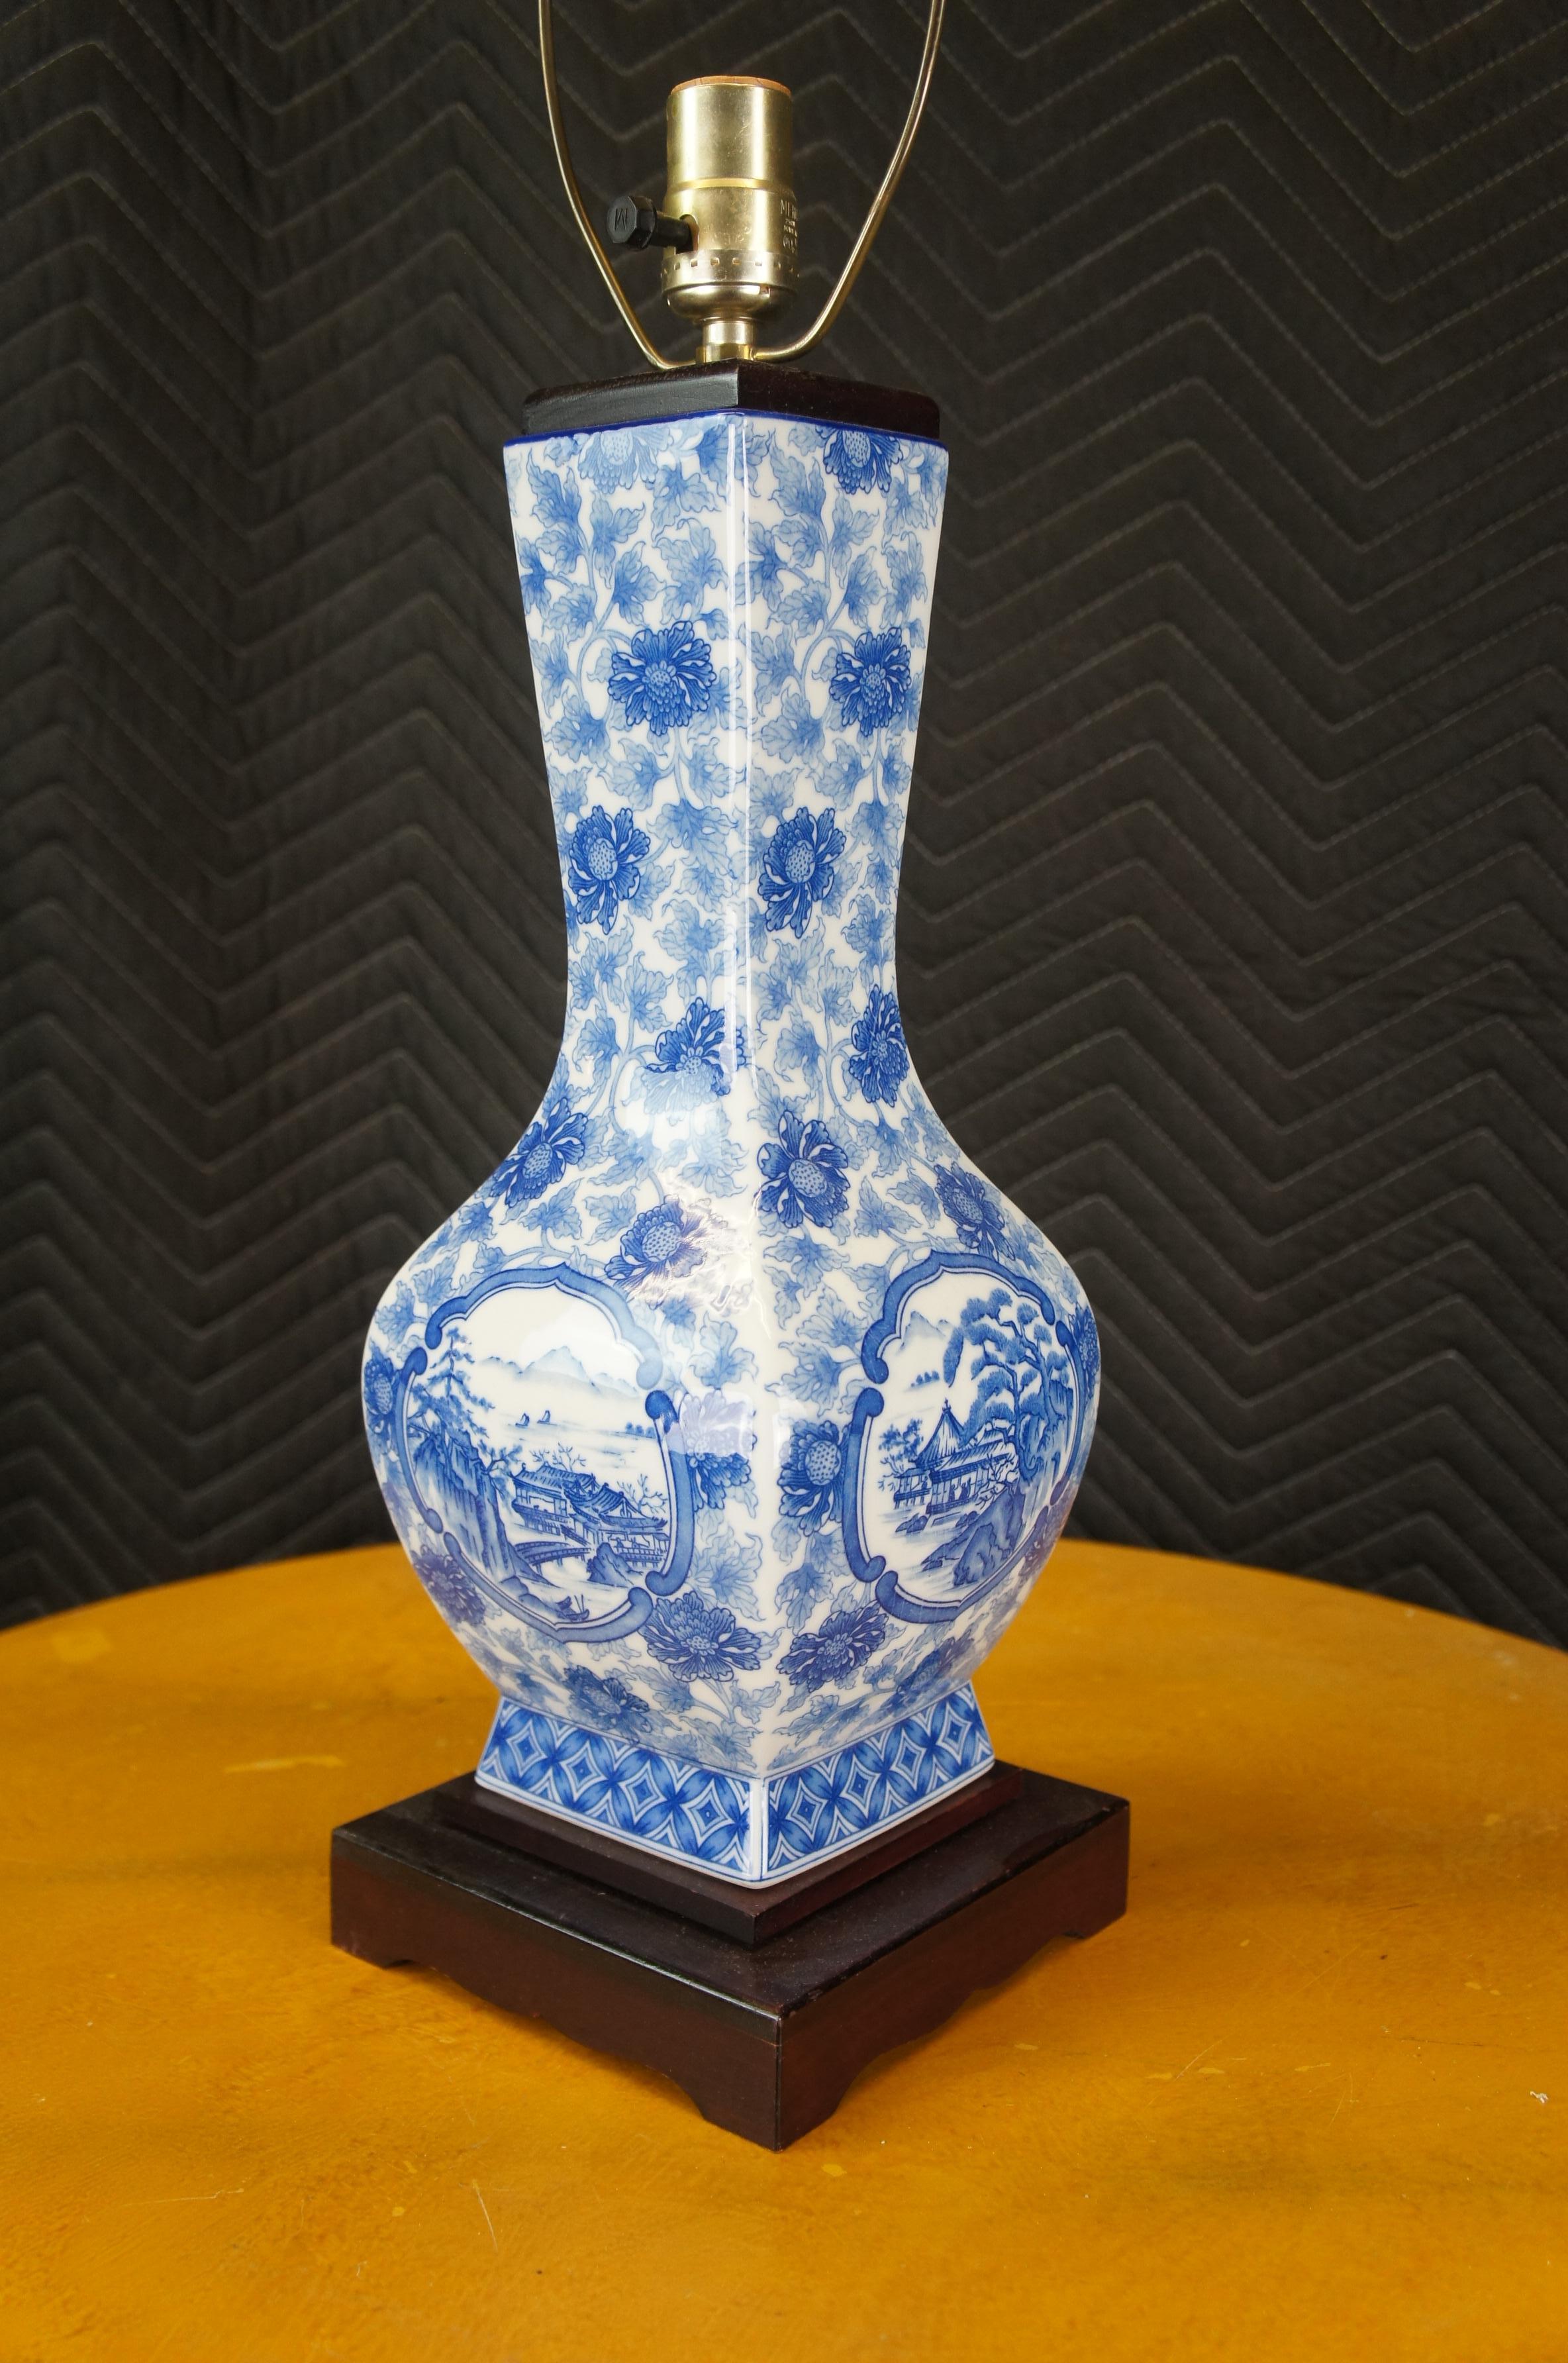 Chinese Blue & White Porcelain Urn Chrysanthemums Pagoda Landscape Table Lamps In Good Condition For Sale In Dayton, OH